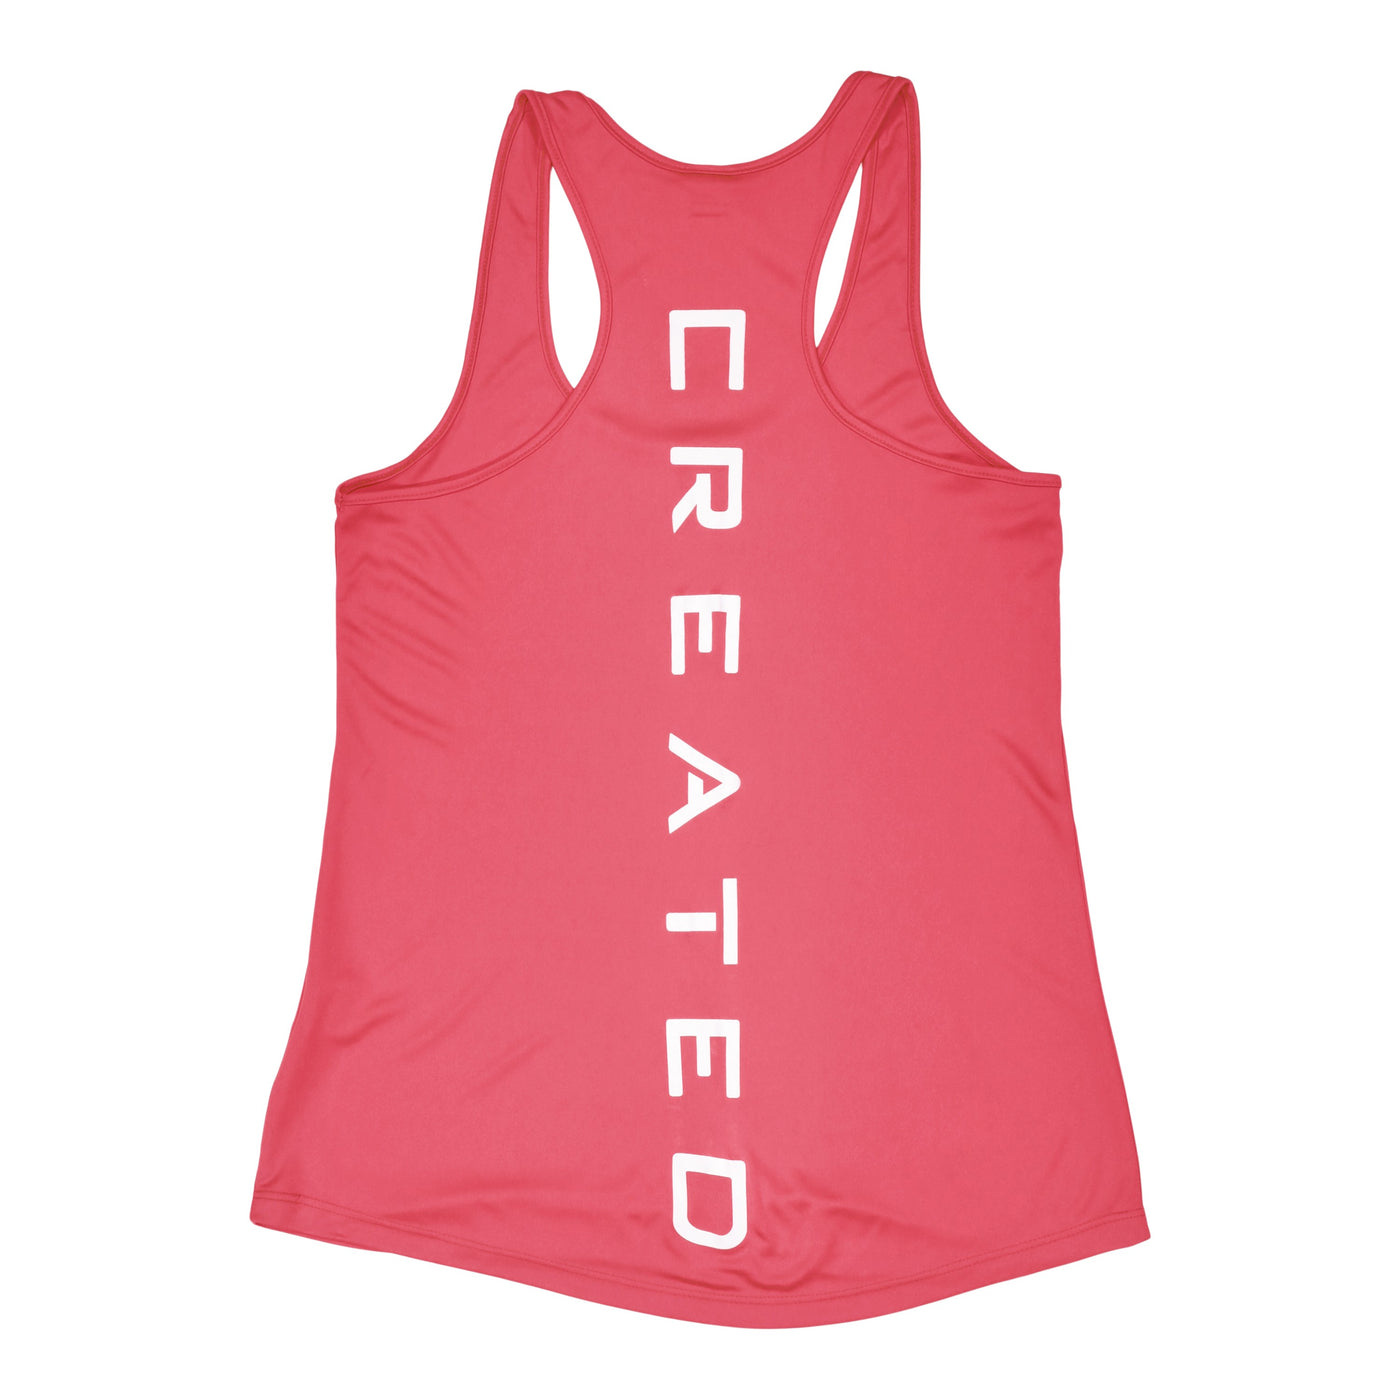 Created Women's Performance coral tank top rear view